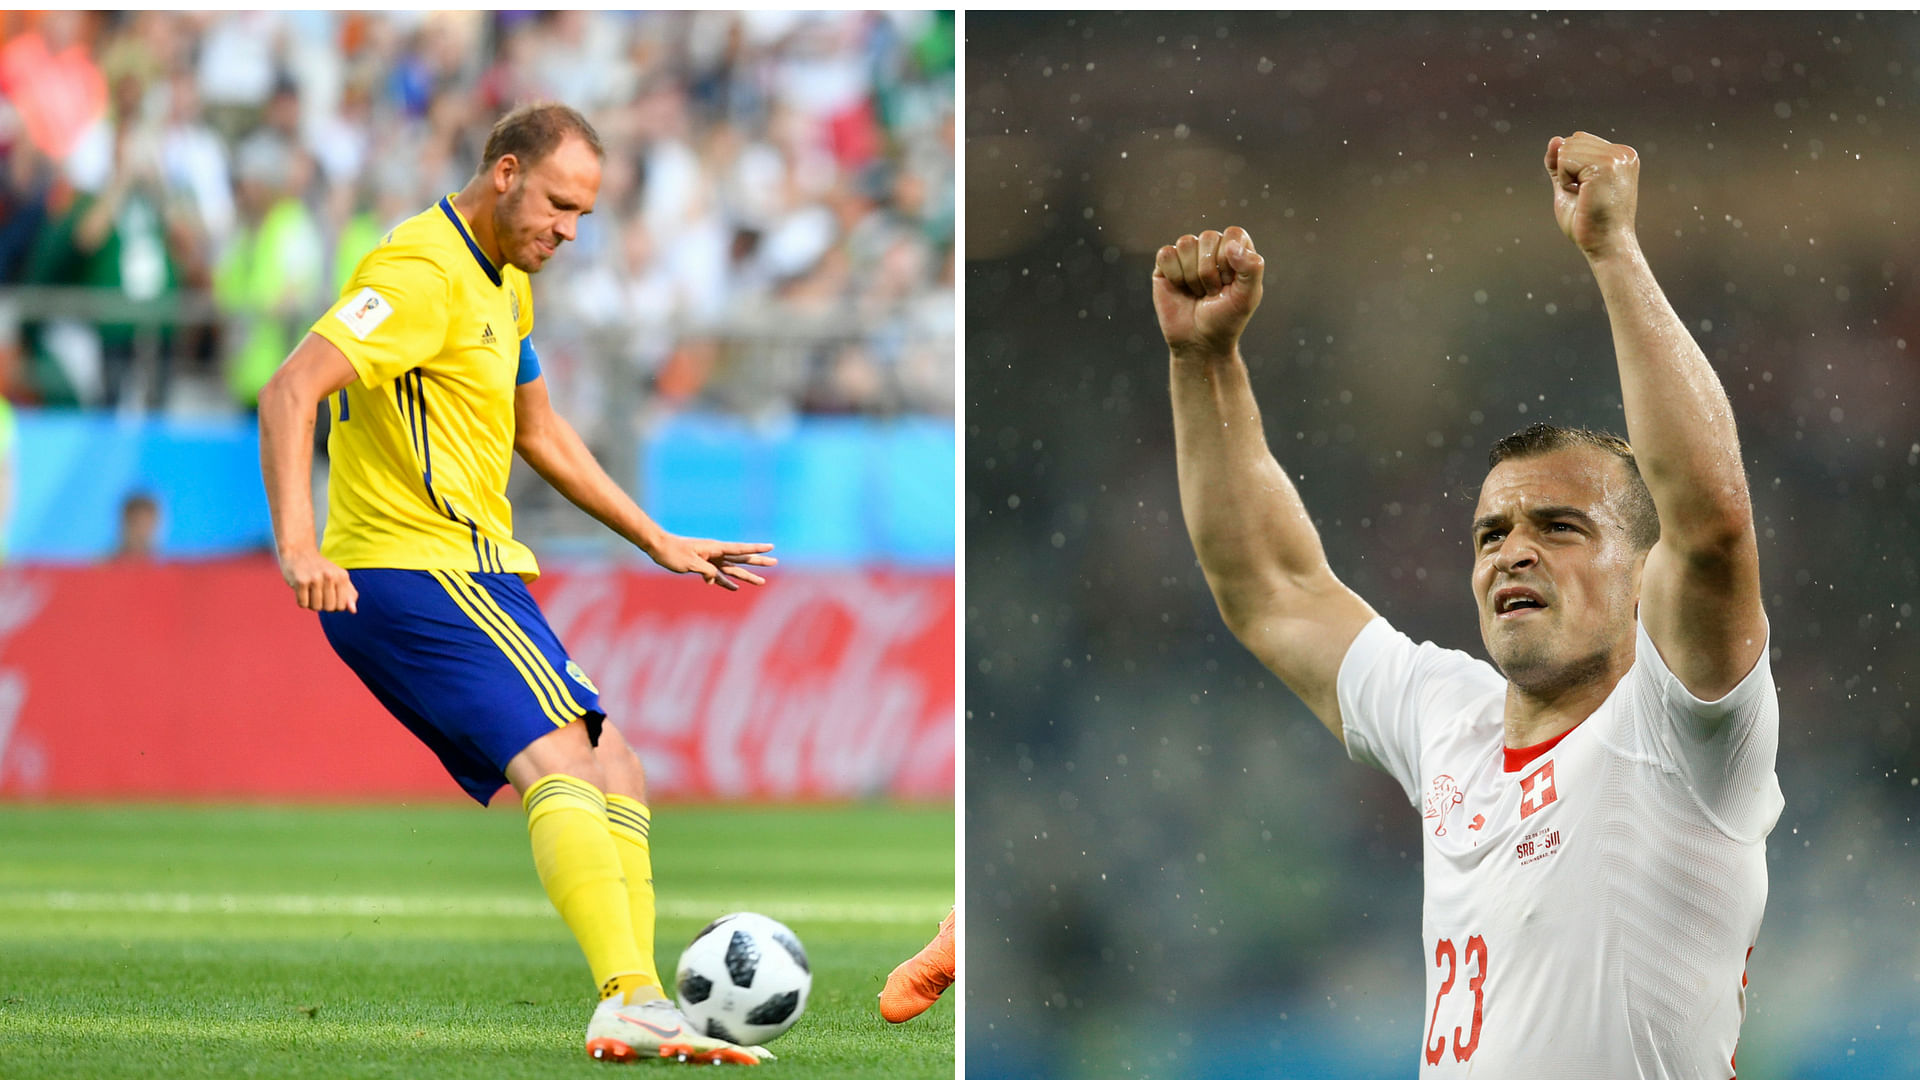 Swedish captain Alexander Granqvist has been solid in defence and has also scored two goals, one more than Swiss midfielder Xherdan Shaqiri